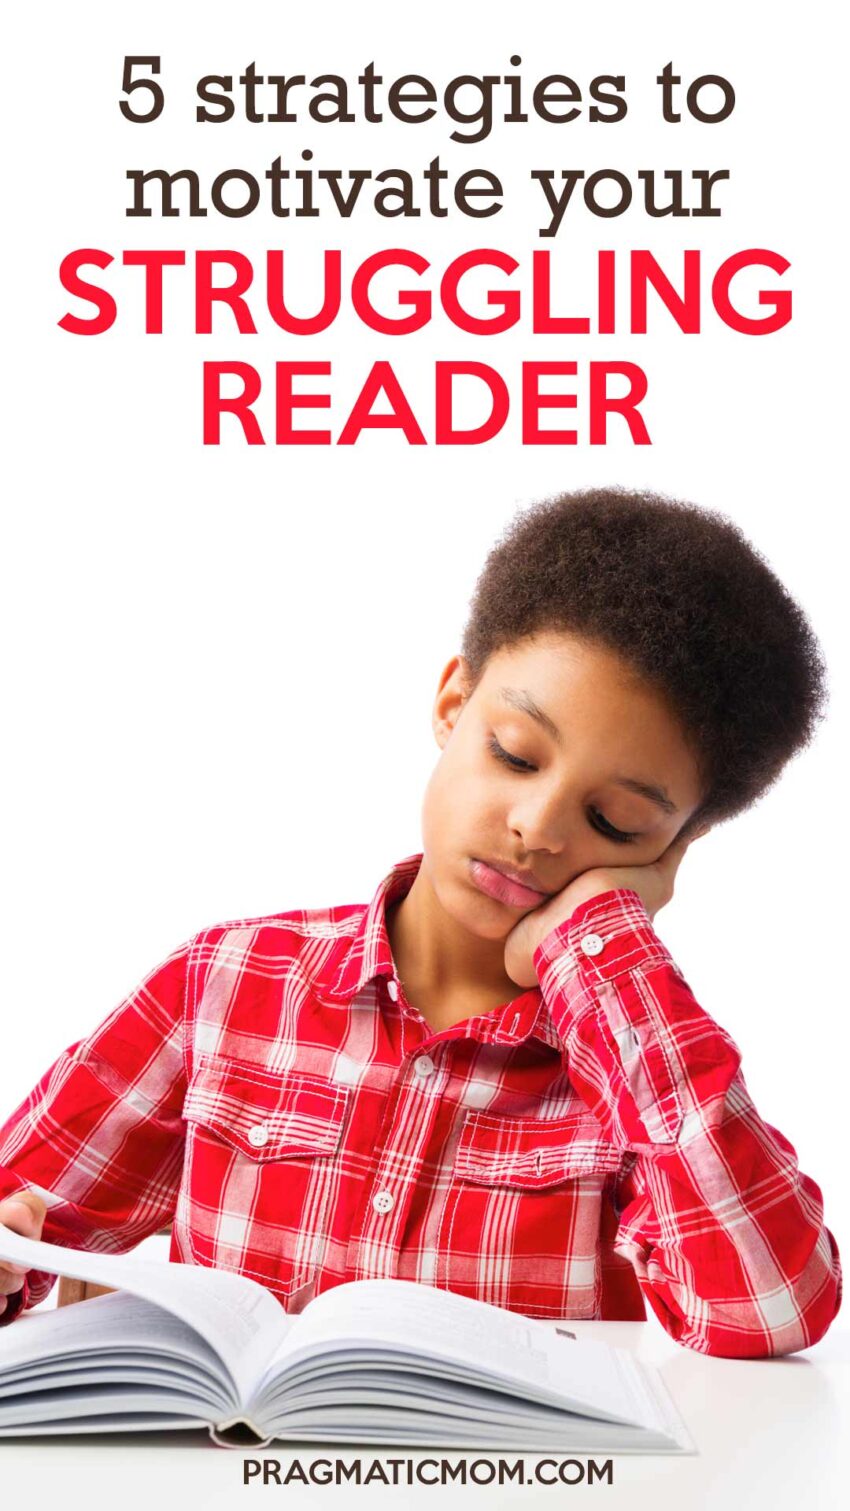 5 Strategies to Motivate Your Struggling Reader